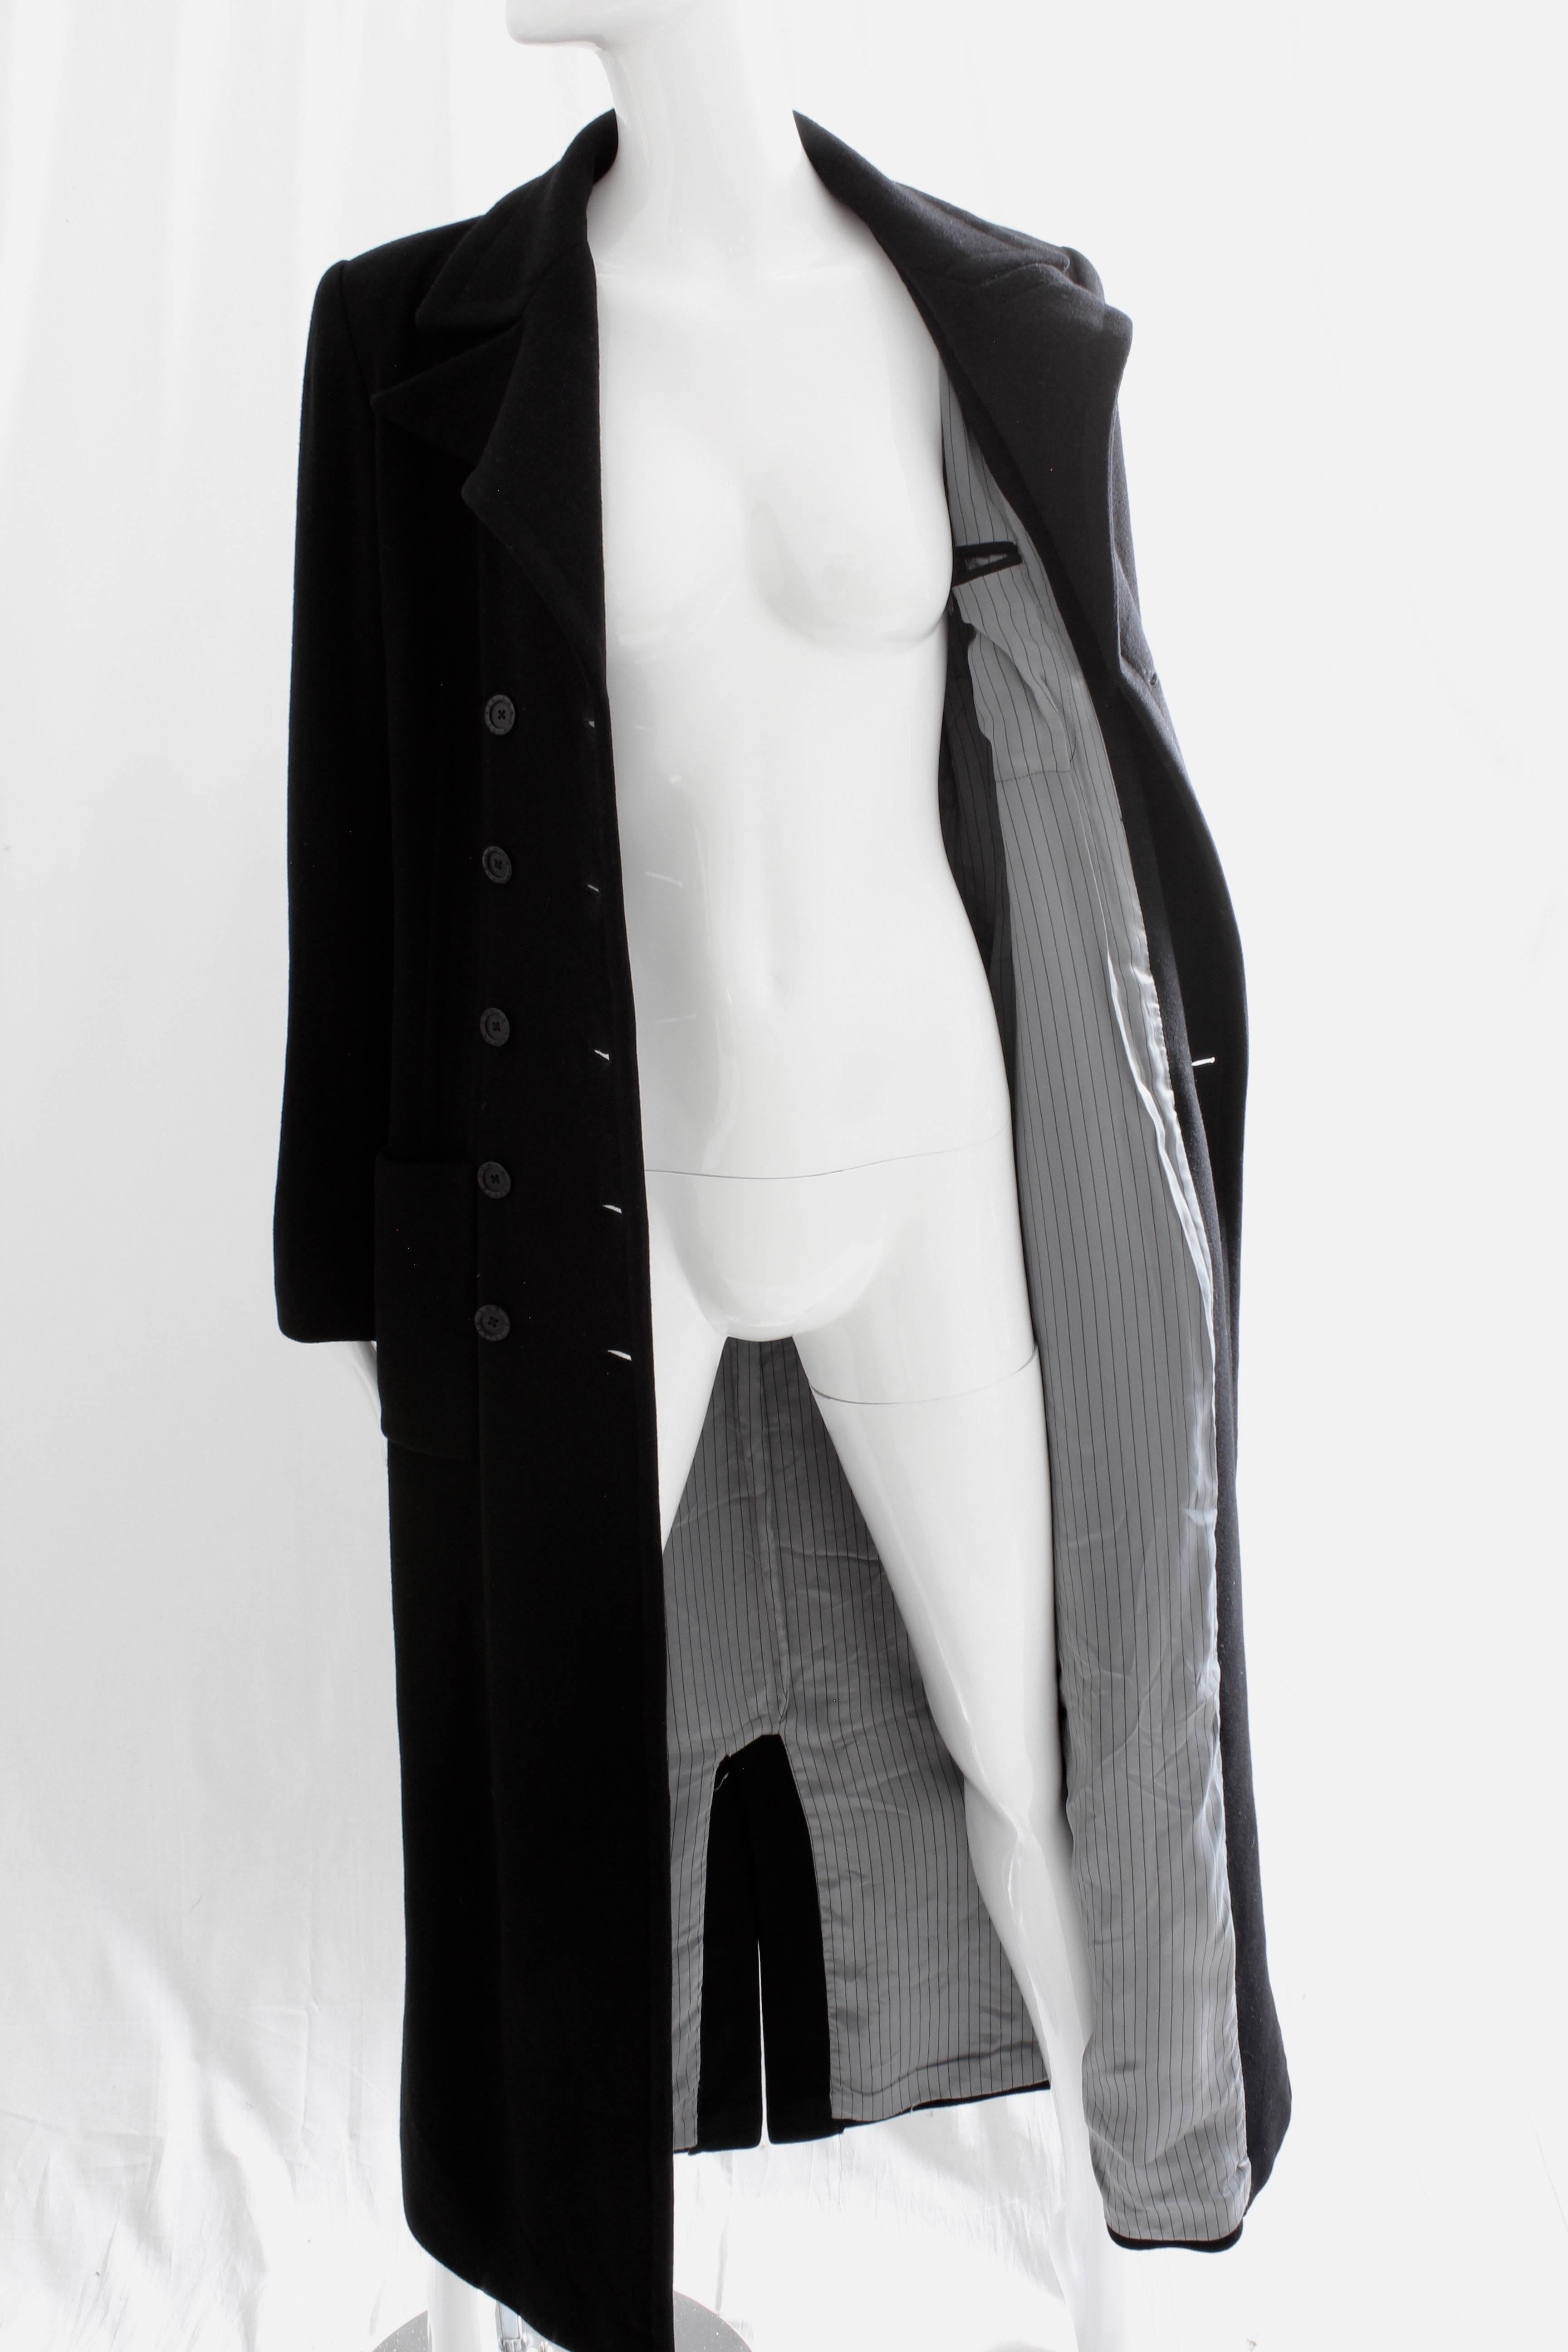 Sonia Rykiel Cashmere Coat Black Double Breasted Long Trench Style Sz 38 Vintage 3